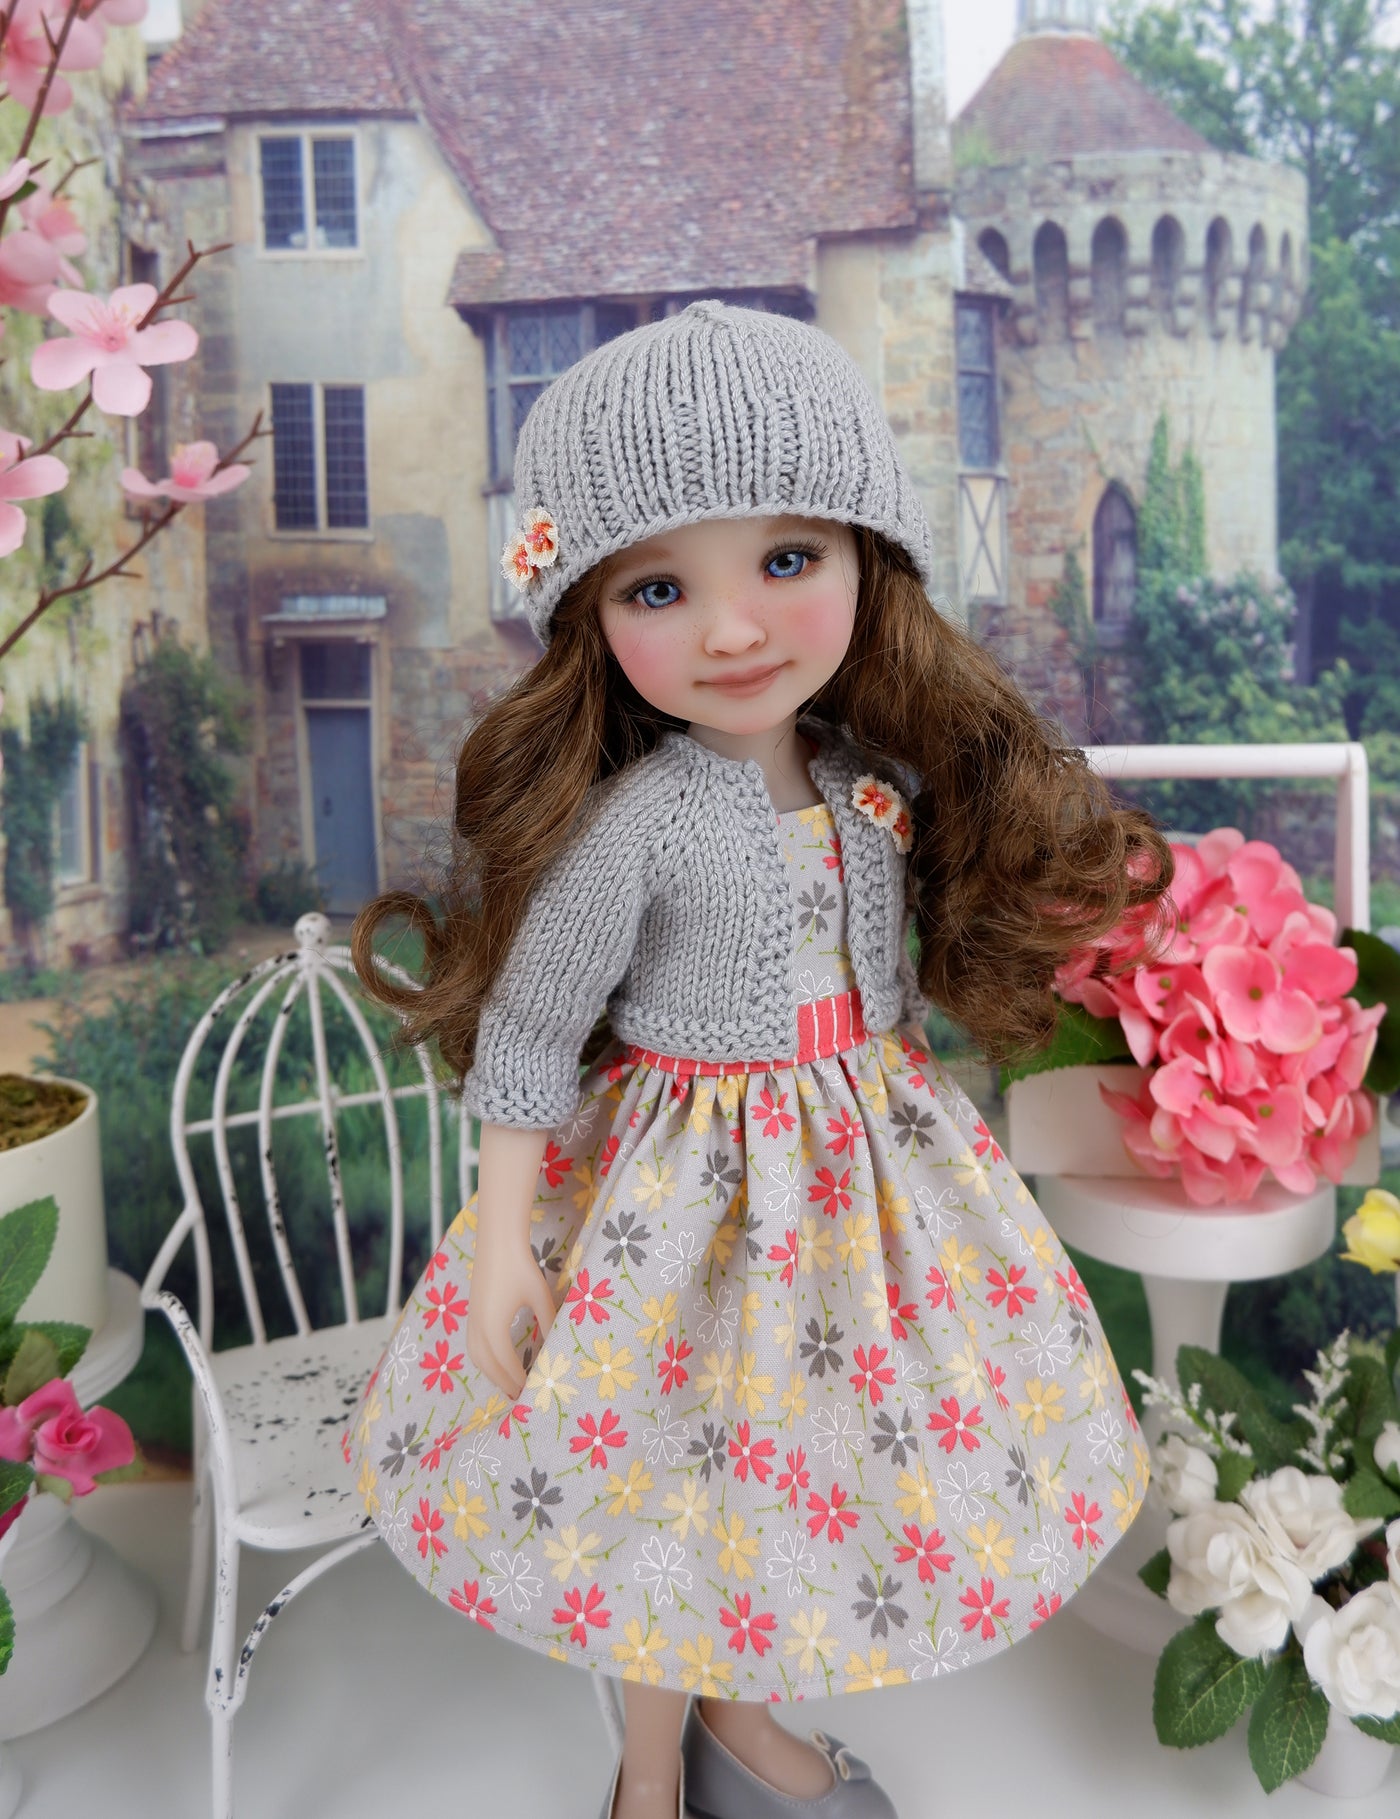 Floral Fields - dress and sweater set with shoes for Ruby Red Fashion Friends doll